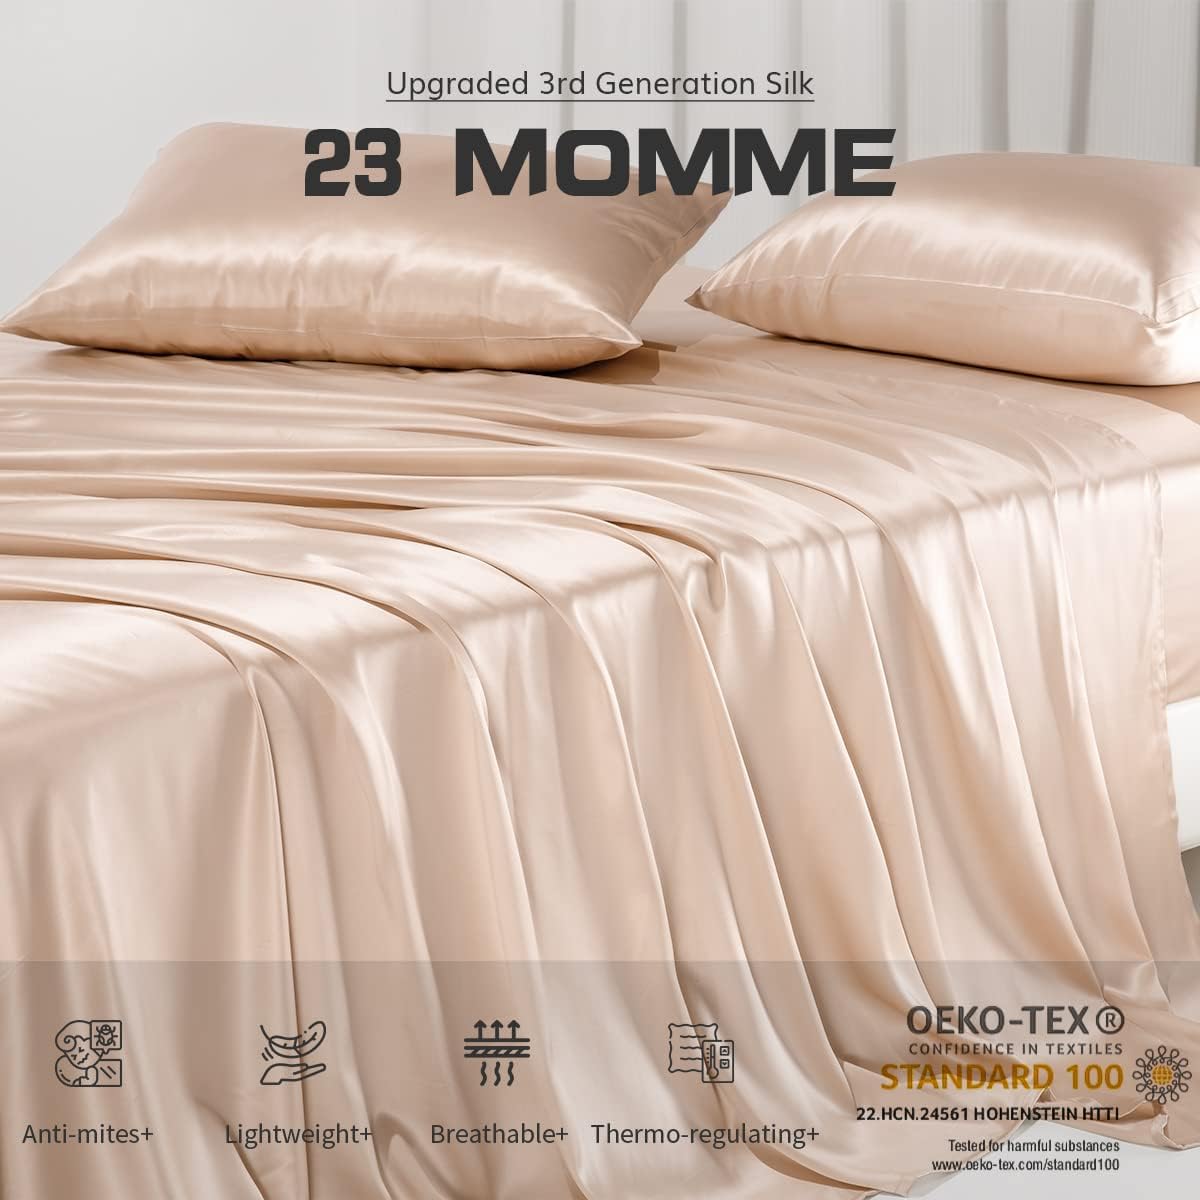 23 Momme California King Silk Sheets Set 4 Pieces, Includes Flat Sheet, Fitted Sheet and 2pcs Pillowcases, 4pcs Mulberry Silk Sheet Set for Cal King Bed (Champagne, California King)